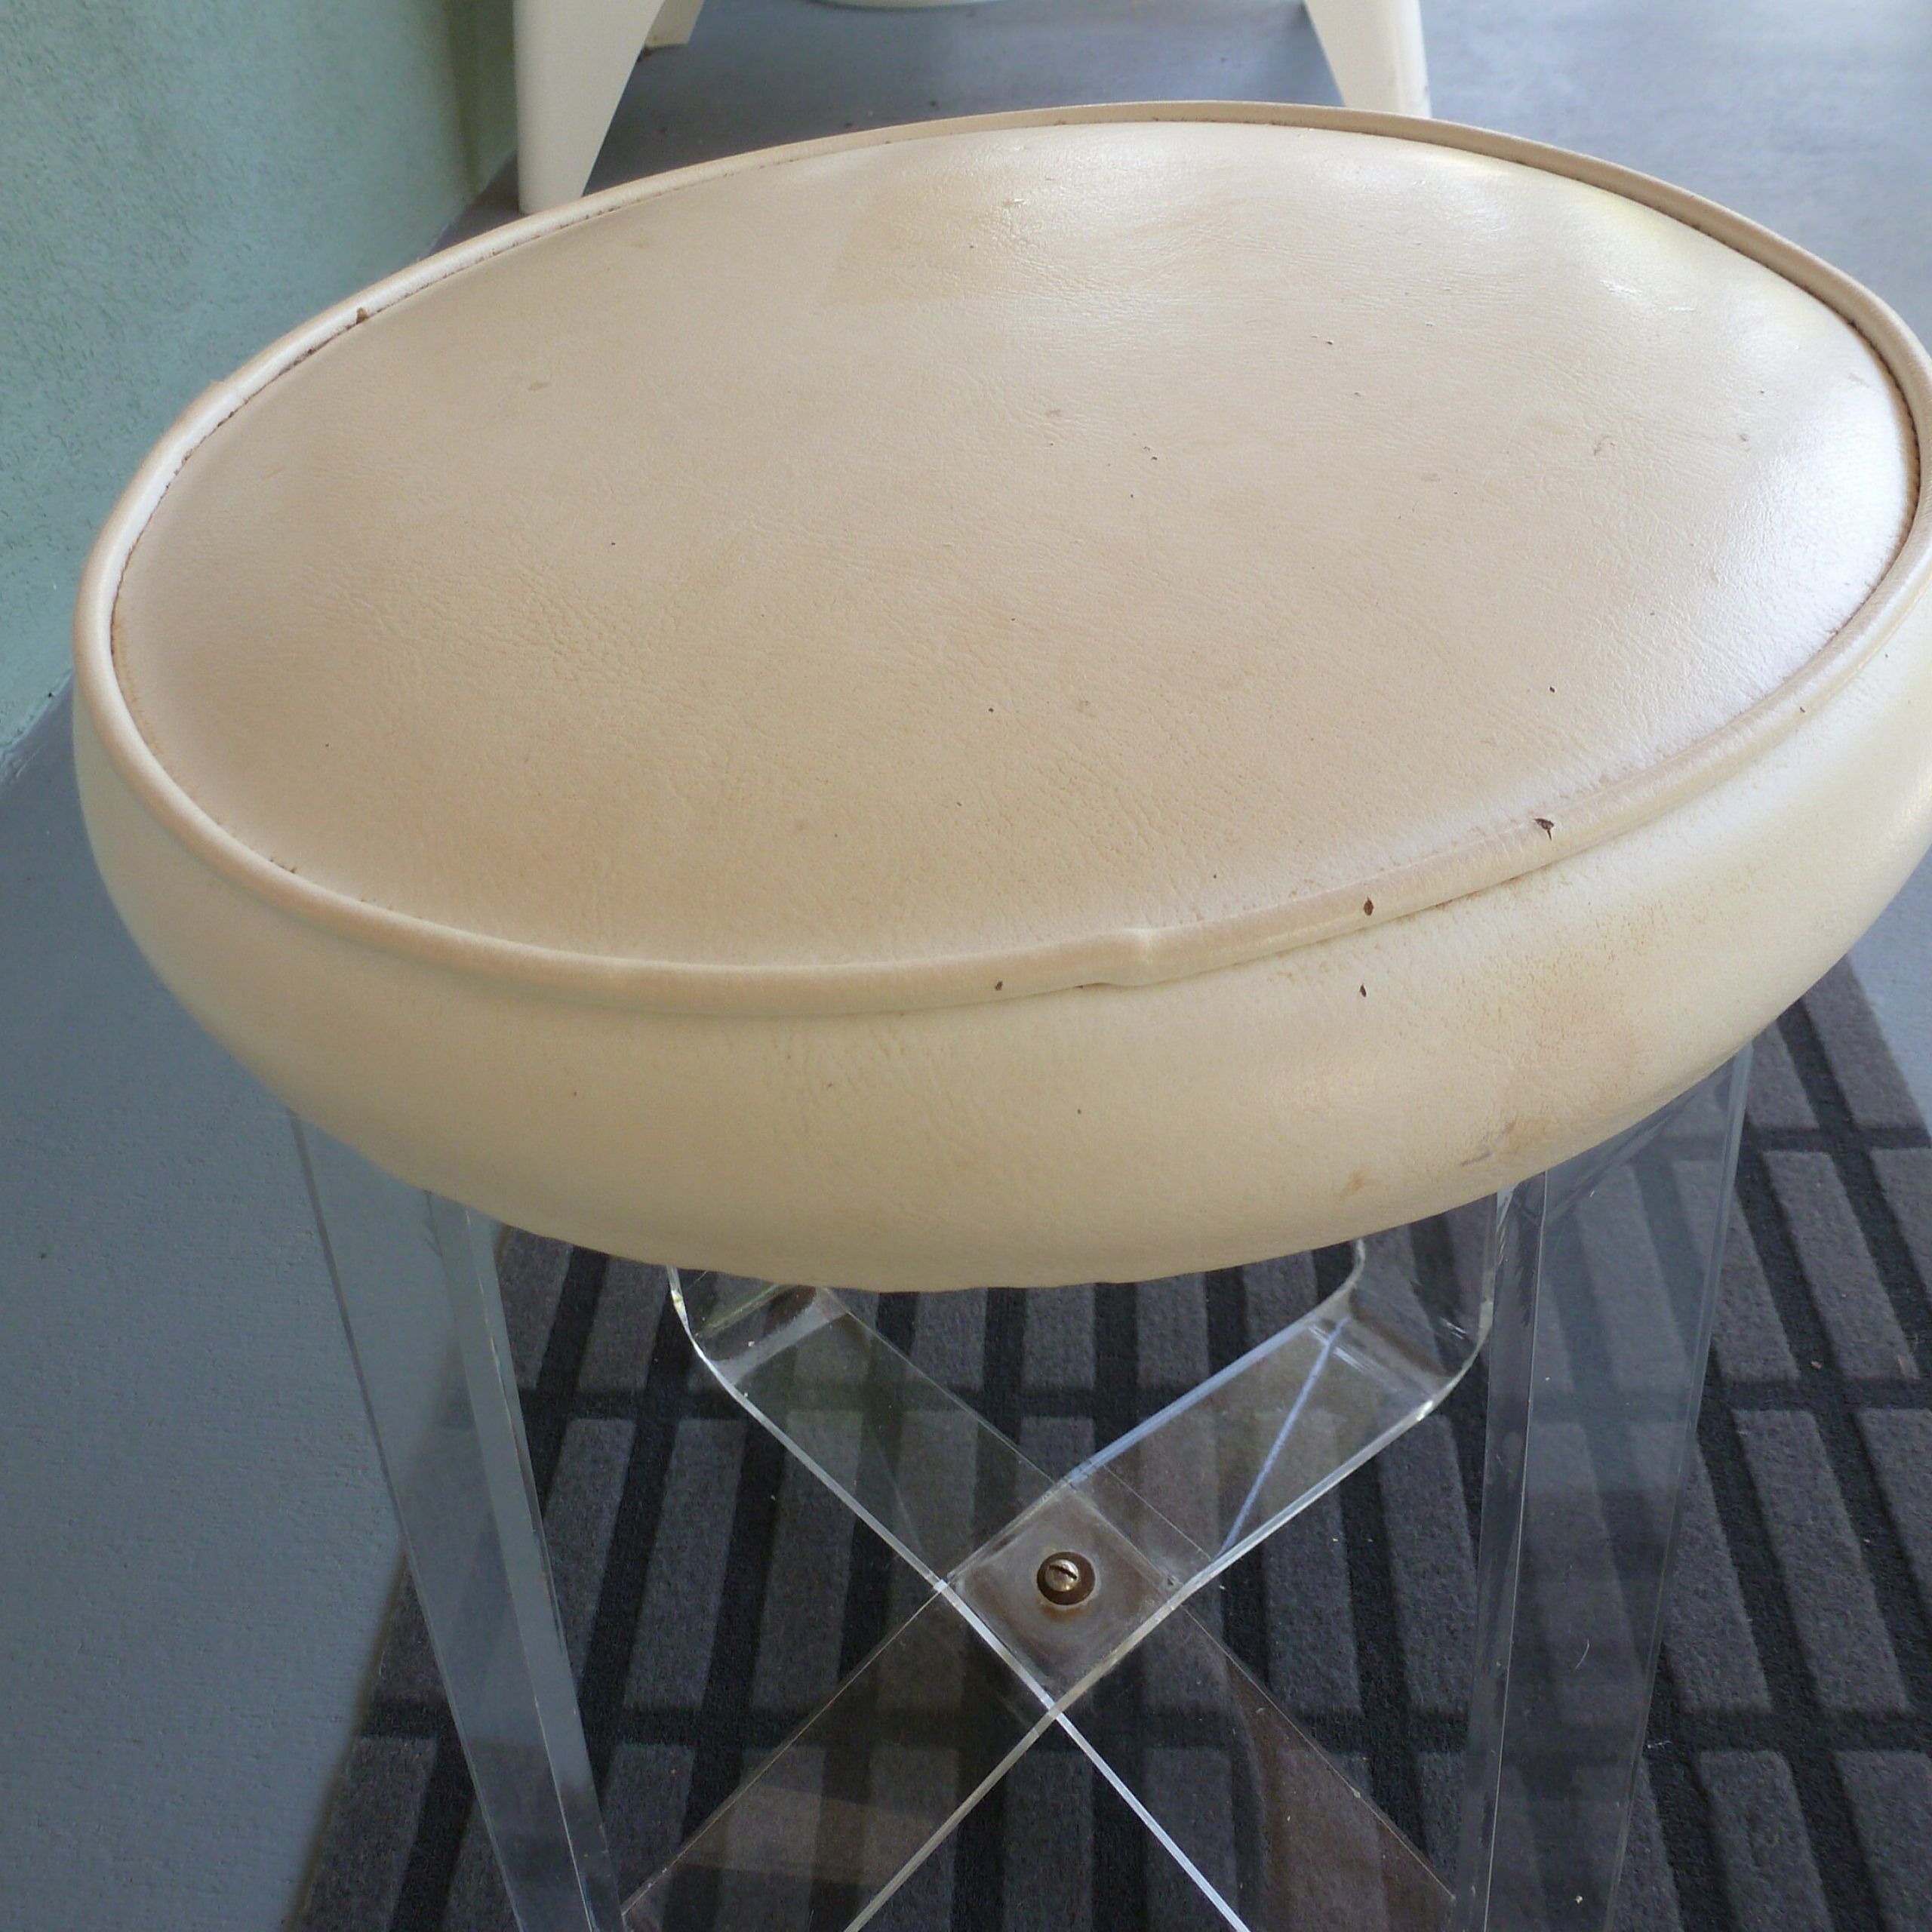 Sale! Rare Midcentury Lucite Acrylic X Base Vanity Stool All Original Intended For White And Clear Acrylic Tufted Vanity Stools (View 18 of 20)